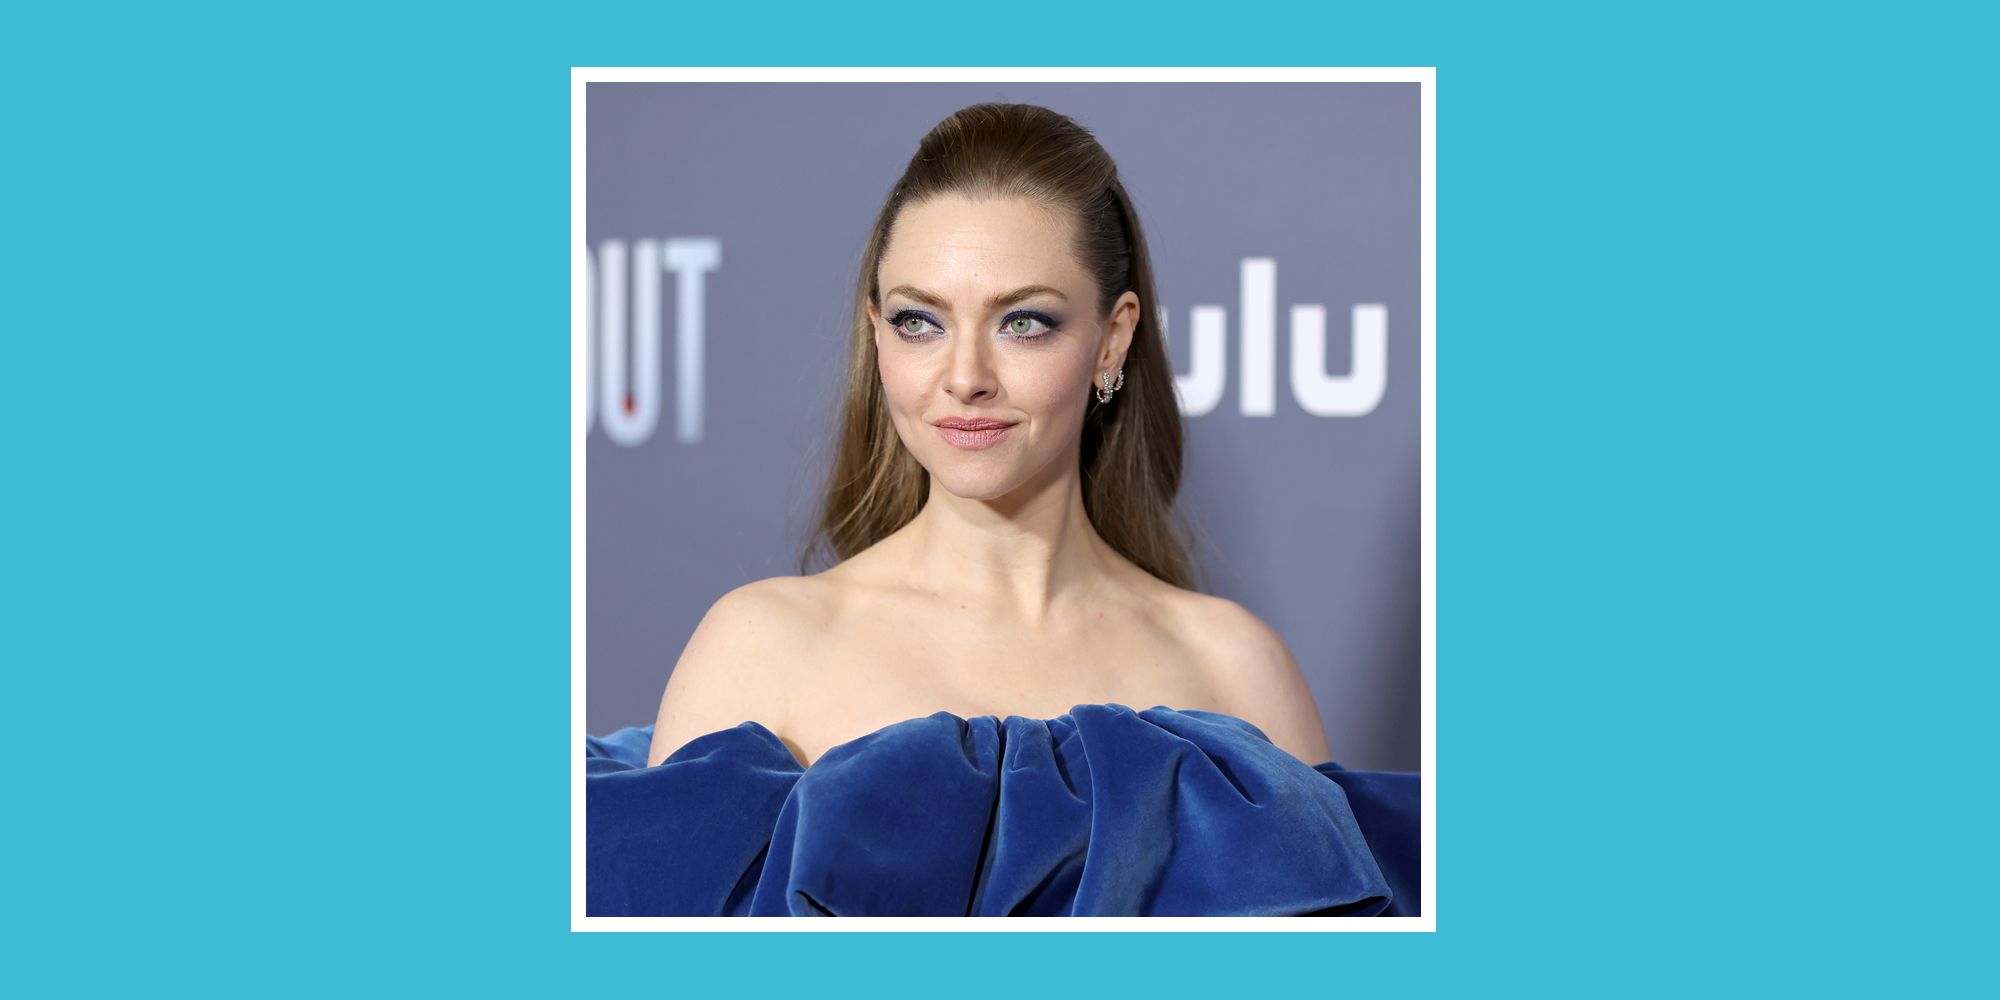 Amanda Seyfried Uses A $16 Surgical Tape To Prevent Wrinkles